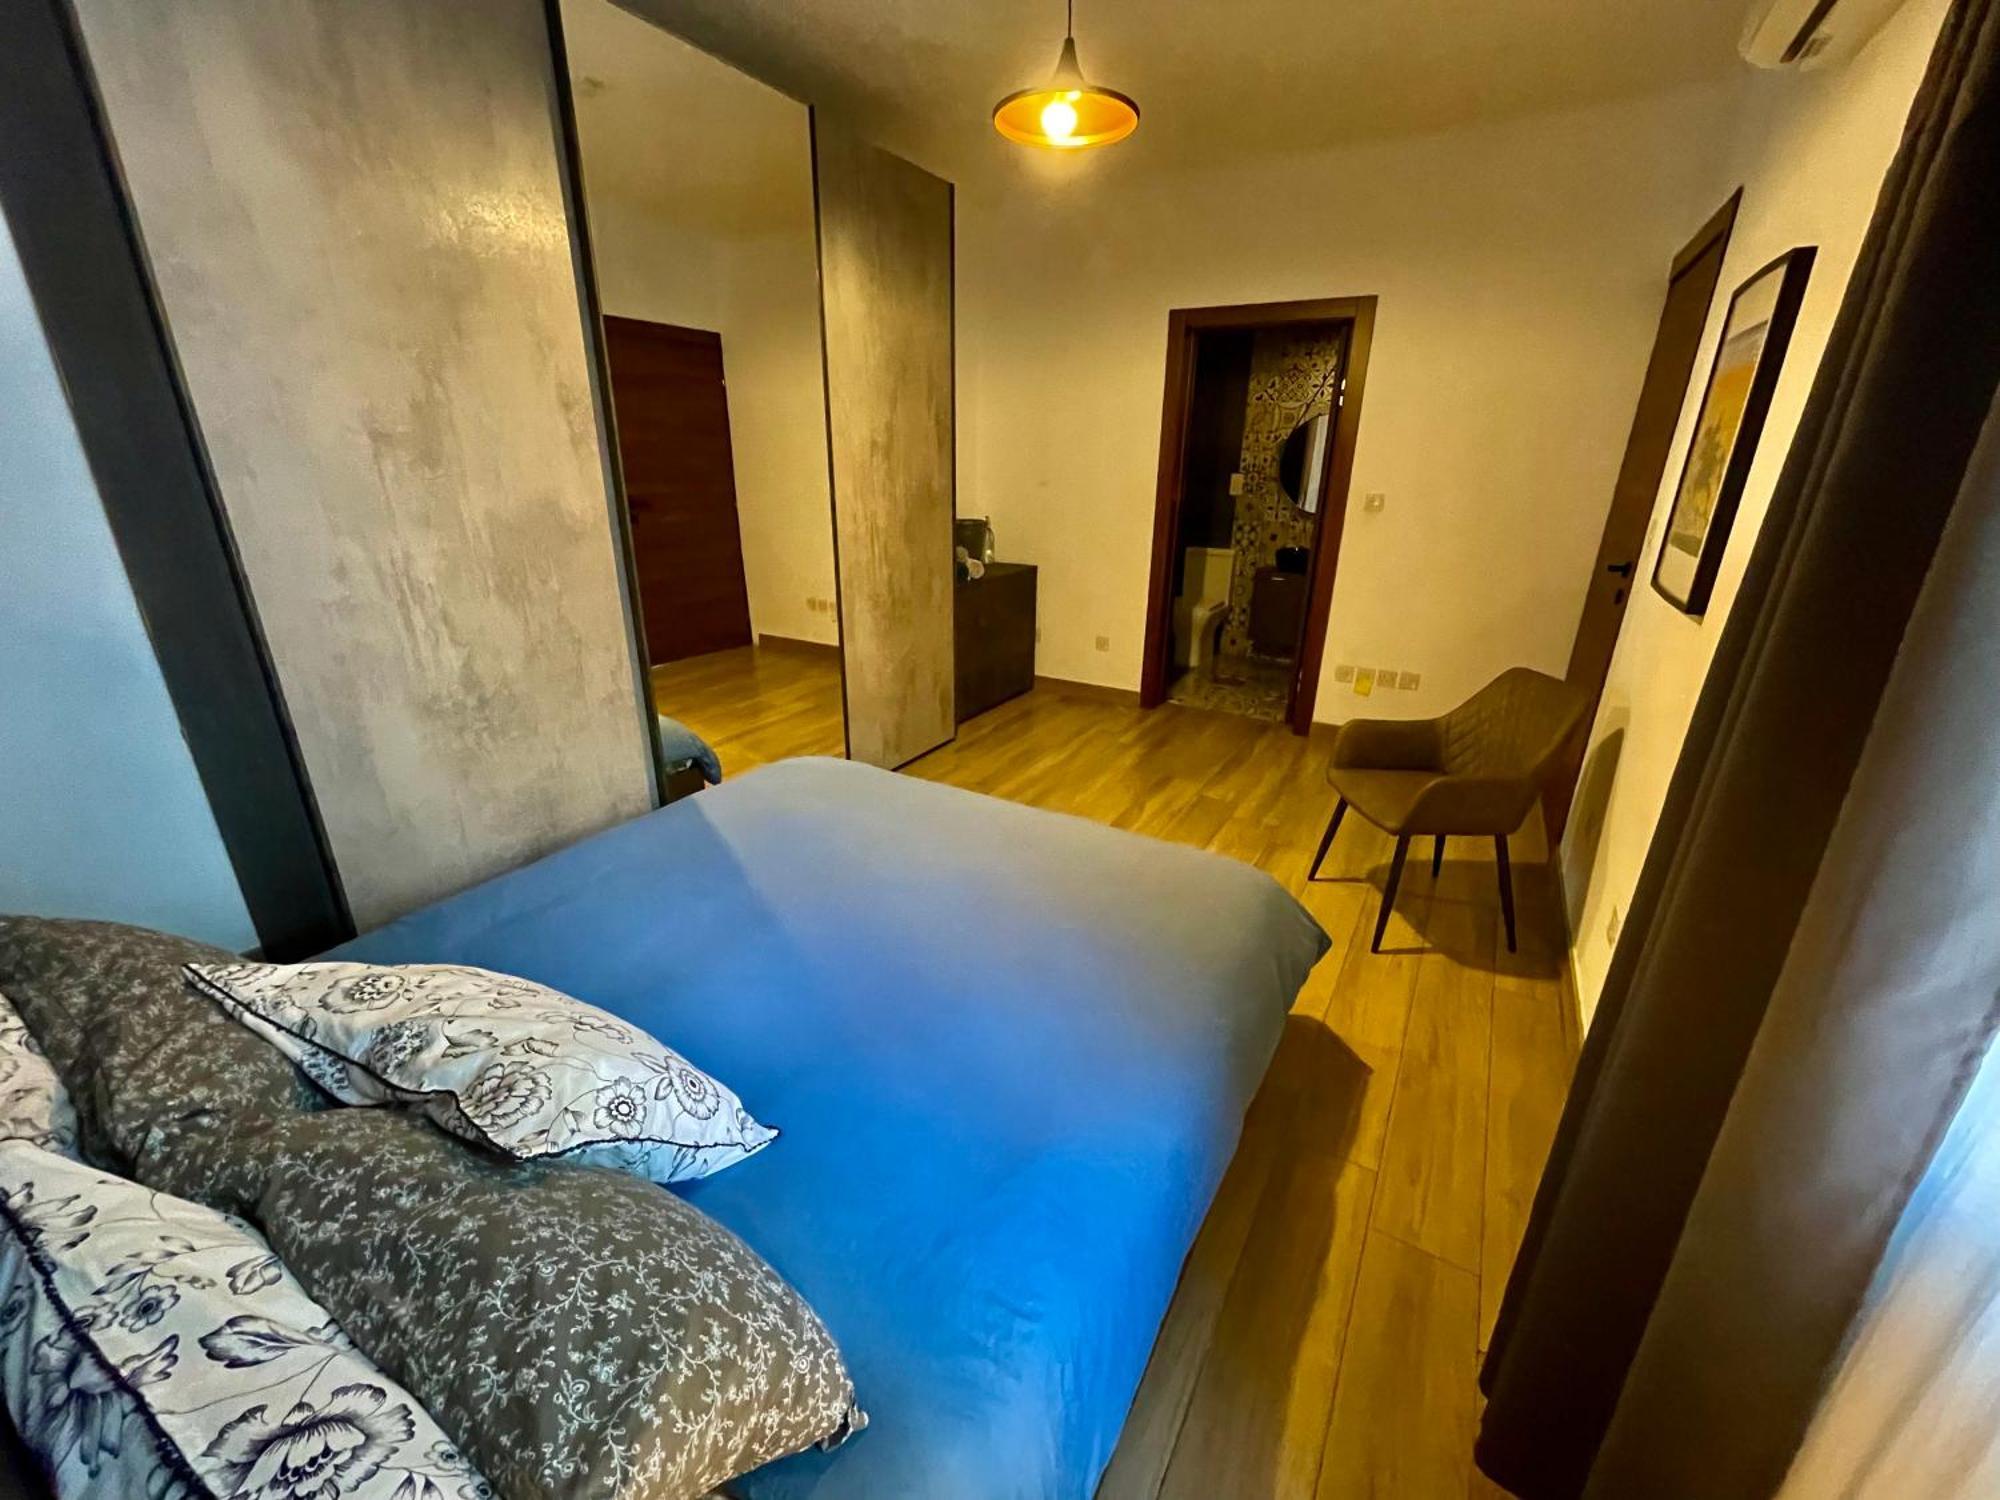 Airport Accommodation Bedroom With Your Own Private Bathroom Self Check In And Self Check Out Air-Condition Included Mqabba Εξωτερικό φωτογραφία